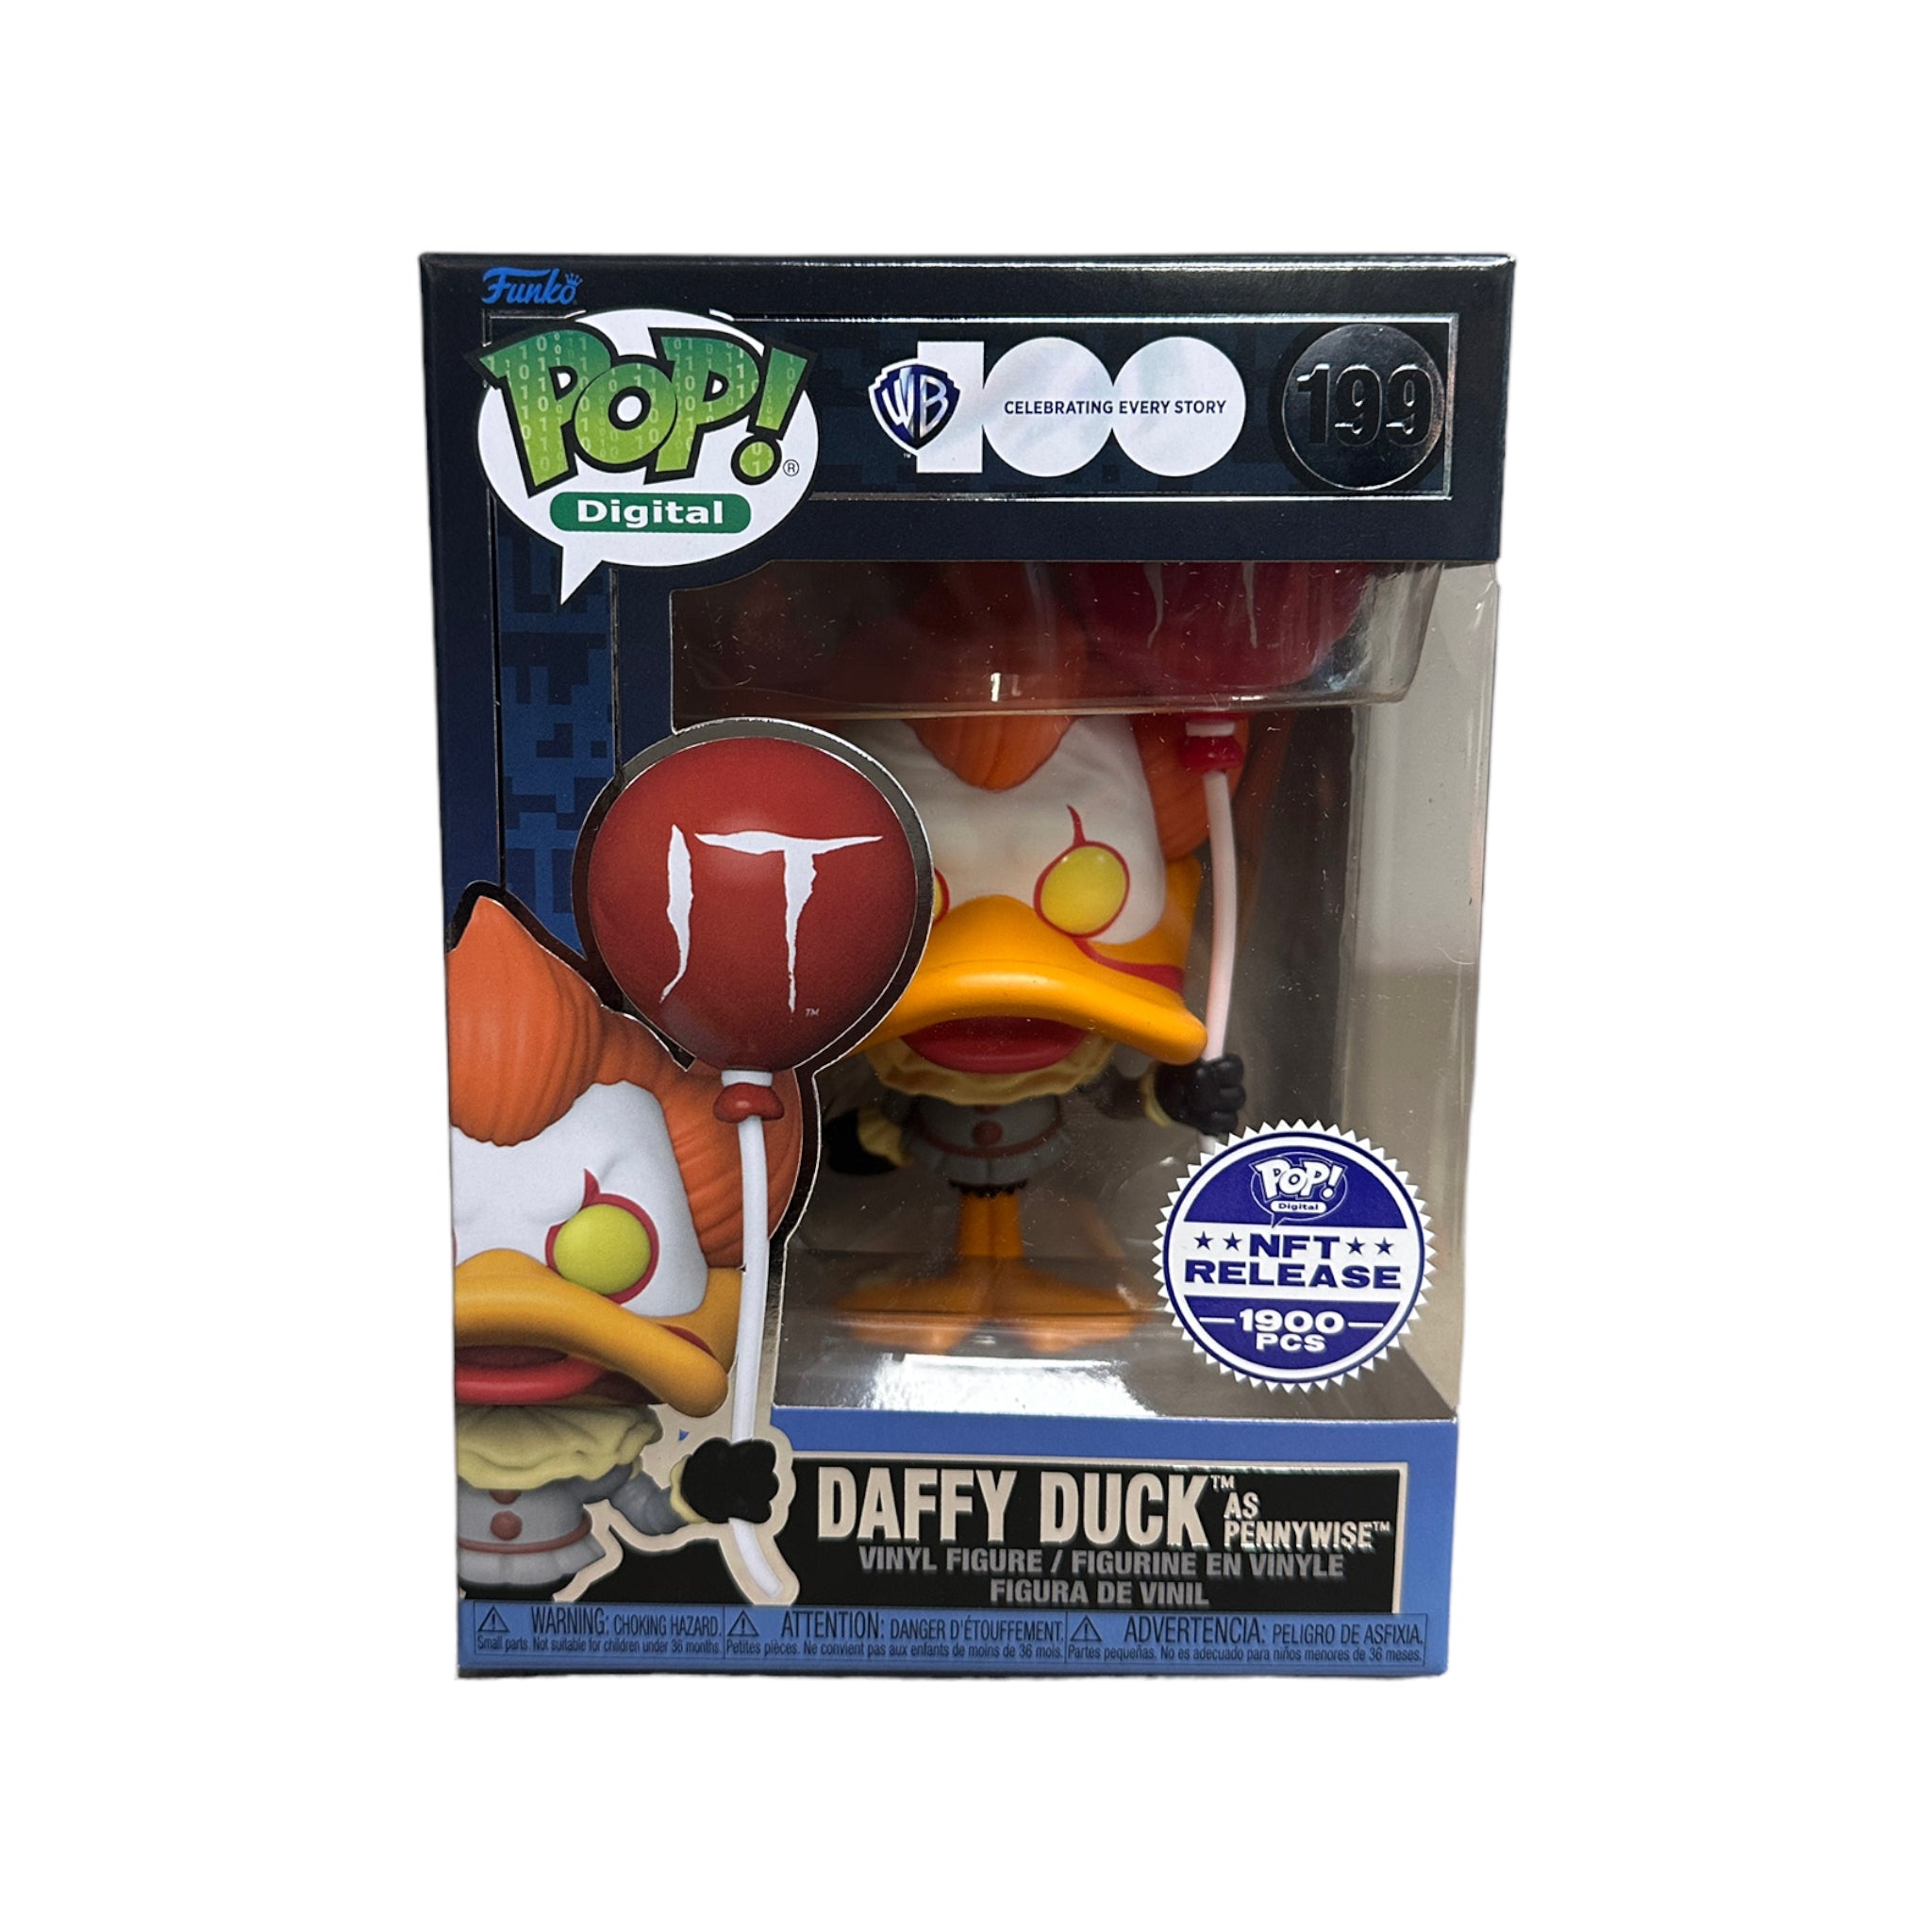 Daffy Duck as Pennywise #199 Funko Pop! - WB 100 - NFT Release Exclusive LE1900 Pcs - Condition 9.5/10